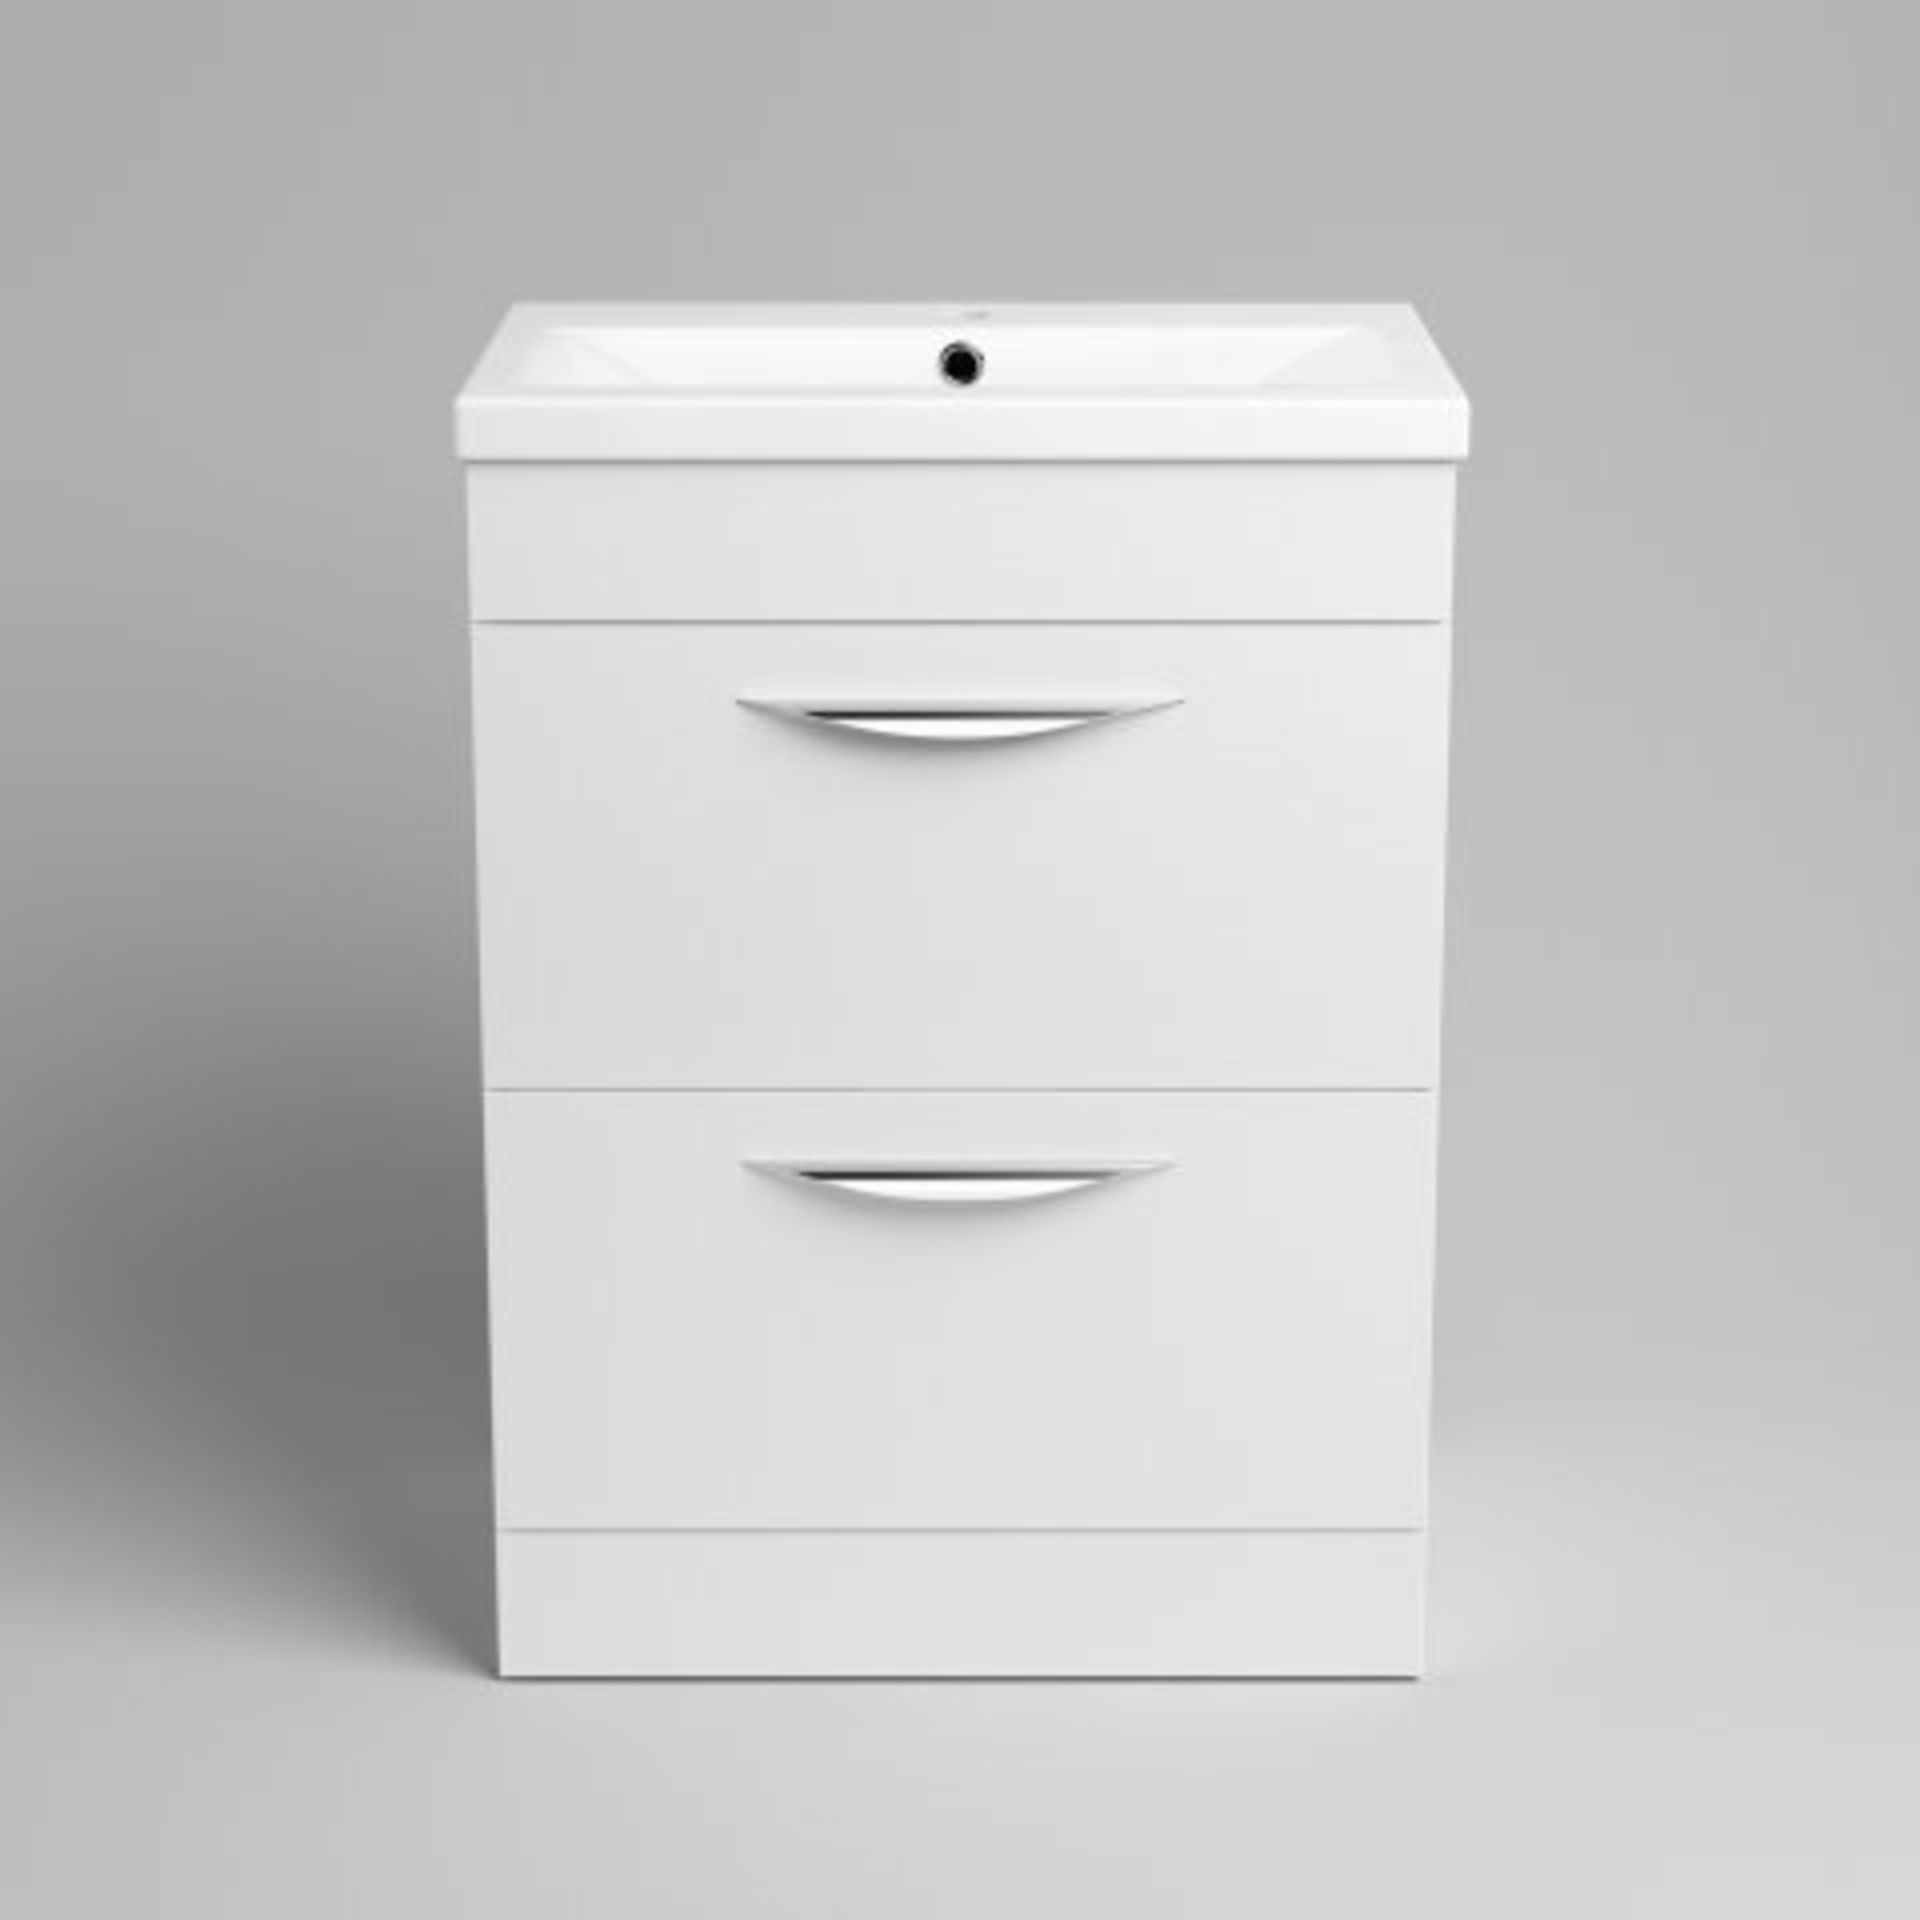 (SKU21) 600mm Severn High Gloss White Double Drawer Basin Cabinet - Floor Standing. RRP £269.99. - Image 3 of 3